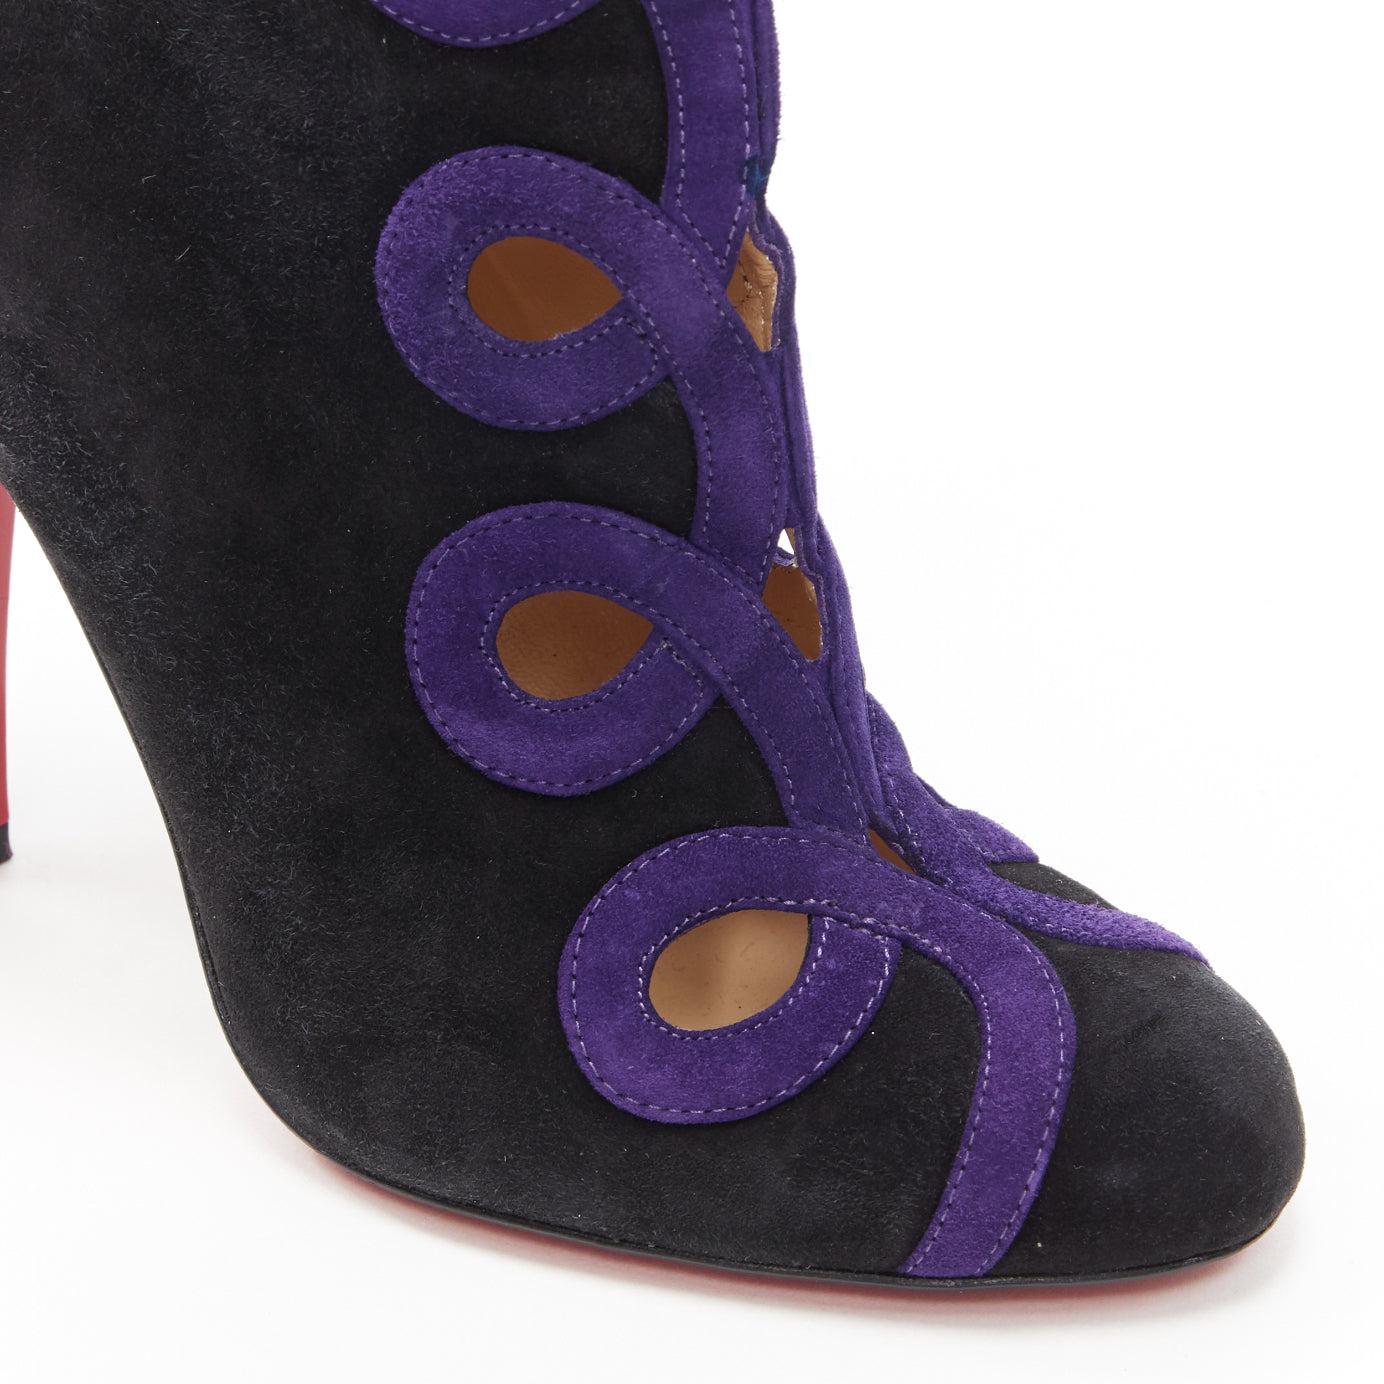 CHRISTIAN LOUBOUTIN black suede purple swirl cut out high heel ankle bootie EU36 For Sale 3